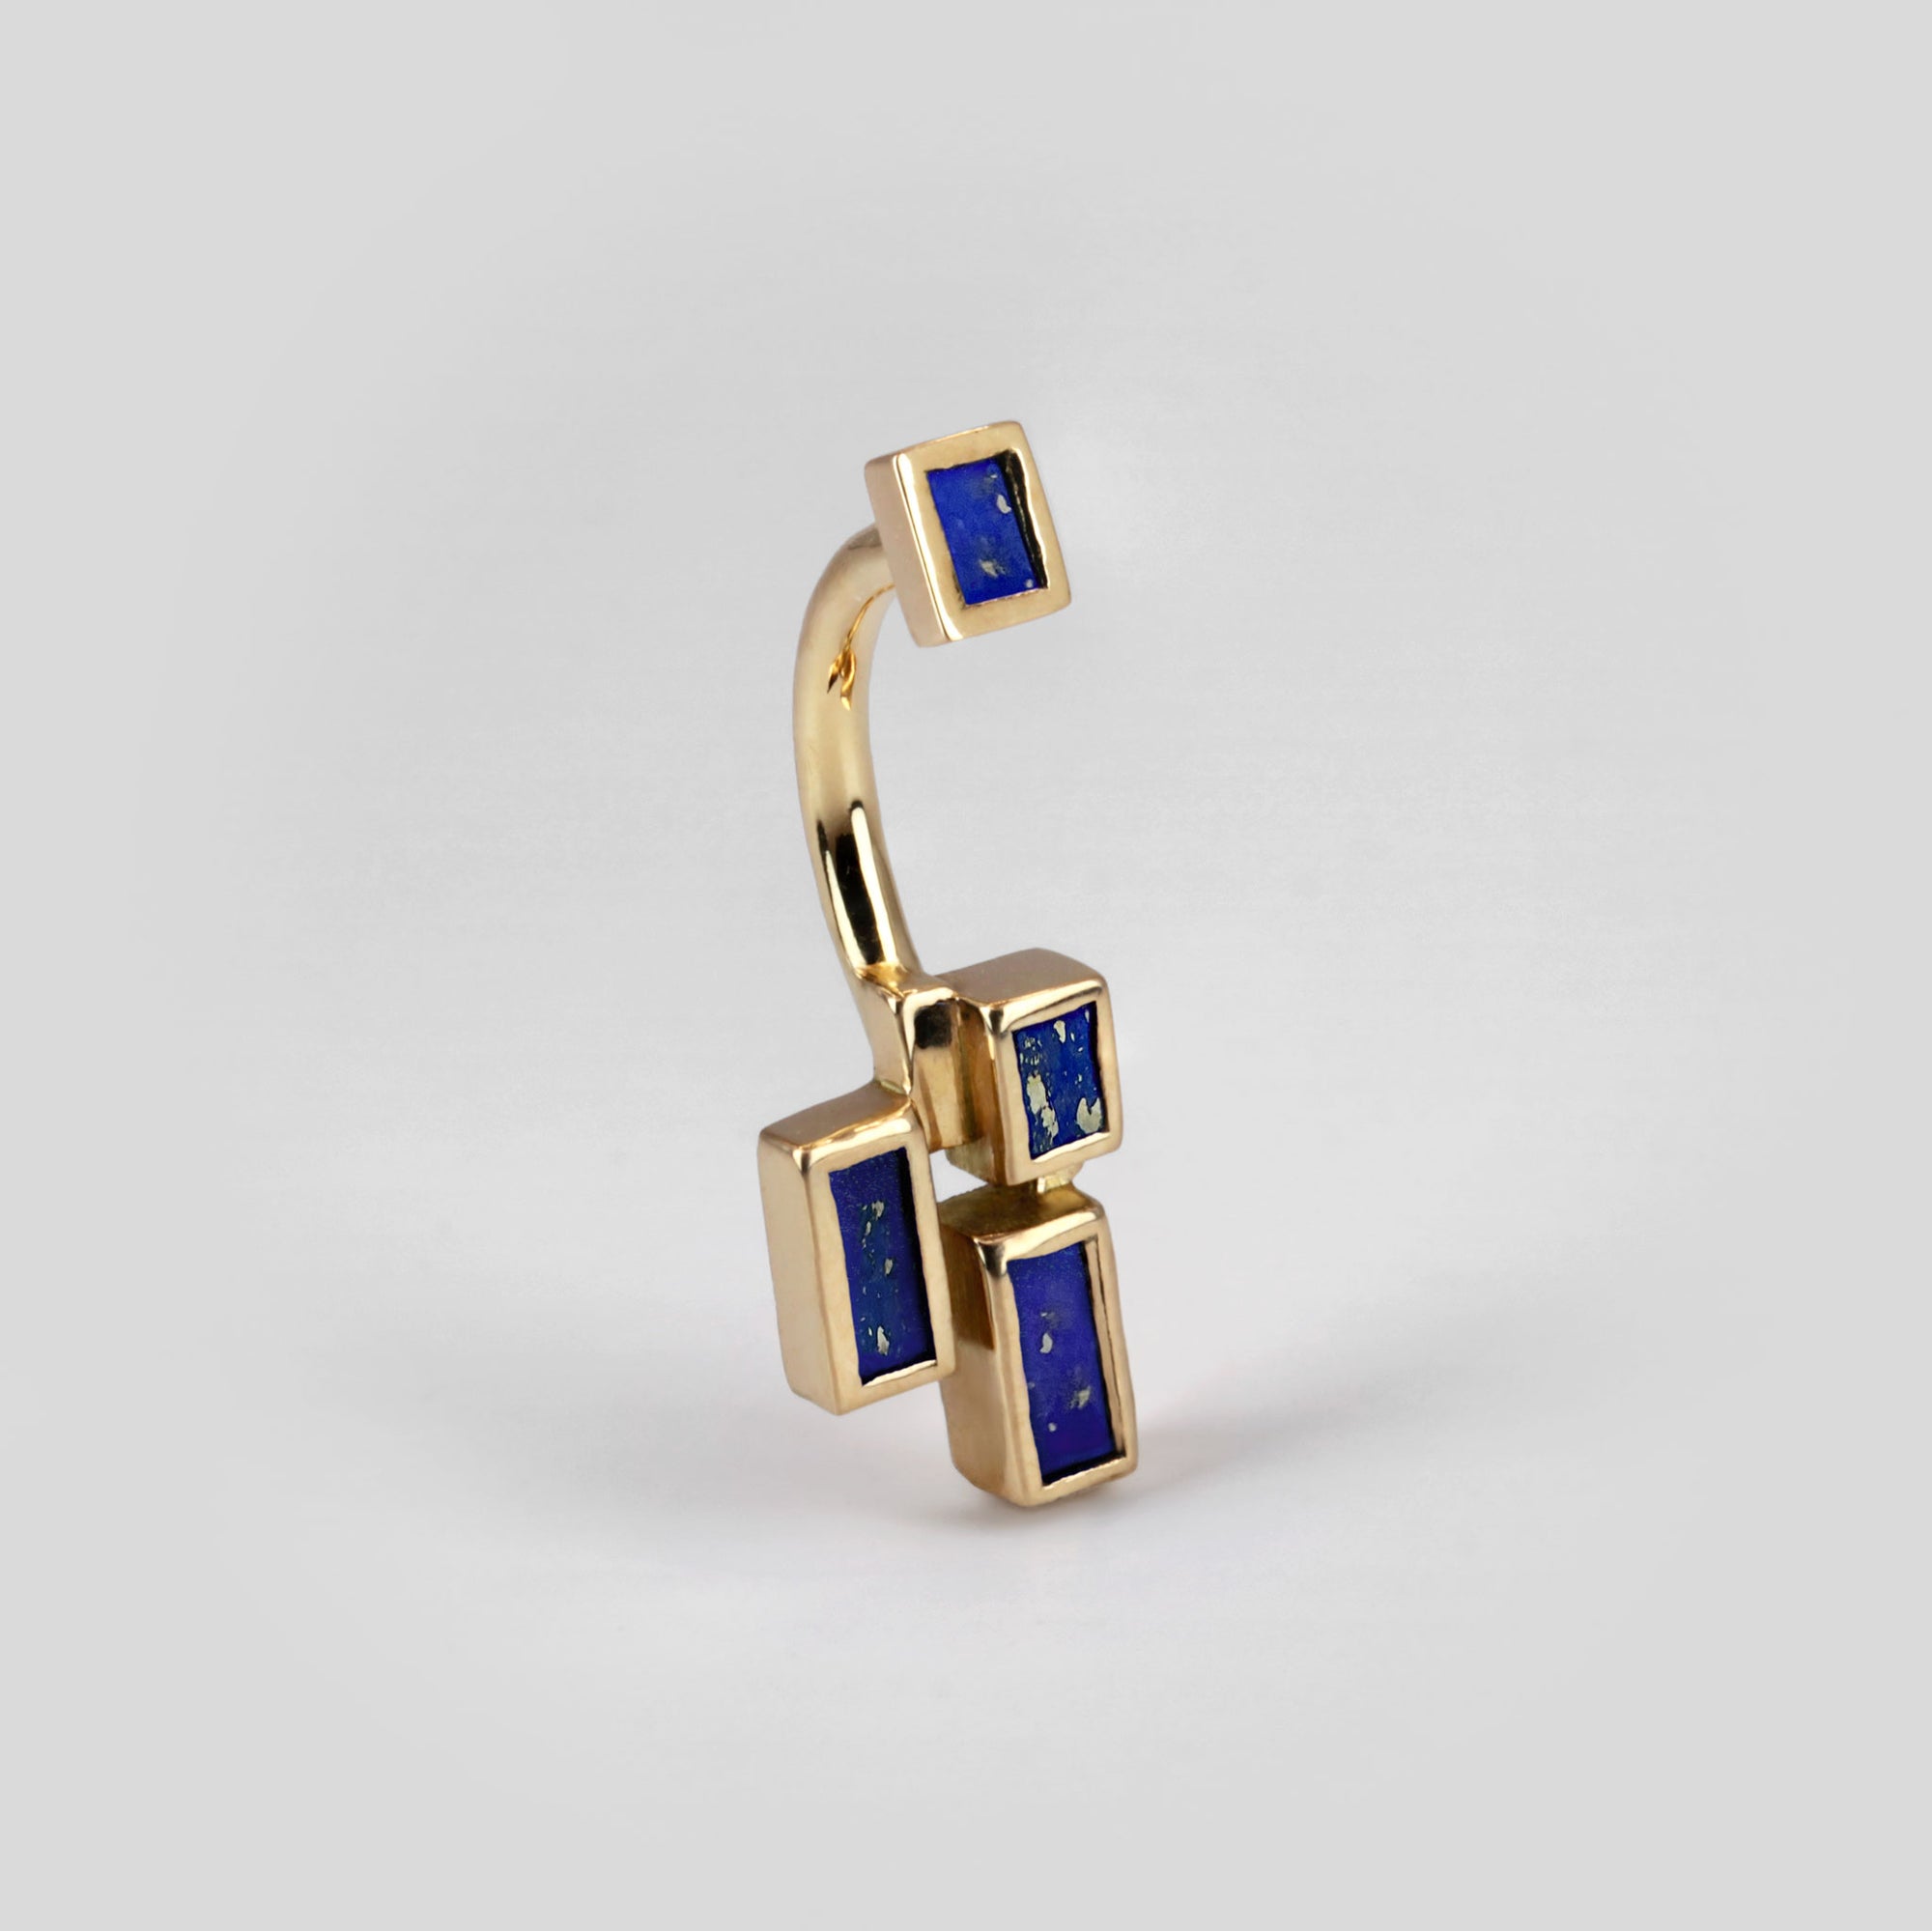 Geometric 18k yellow gold curved navel piercing with lapis lazuli